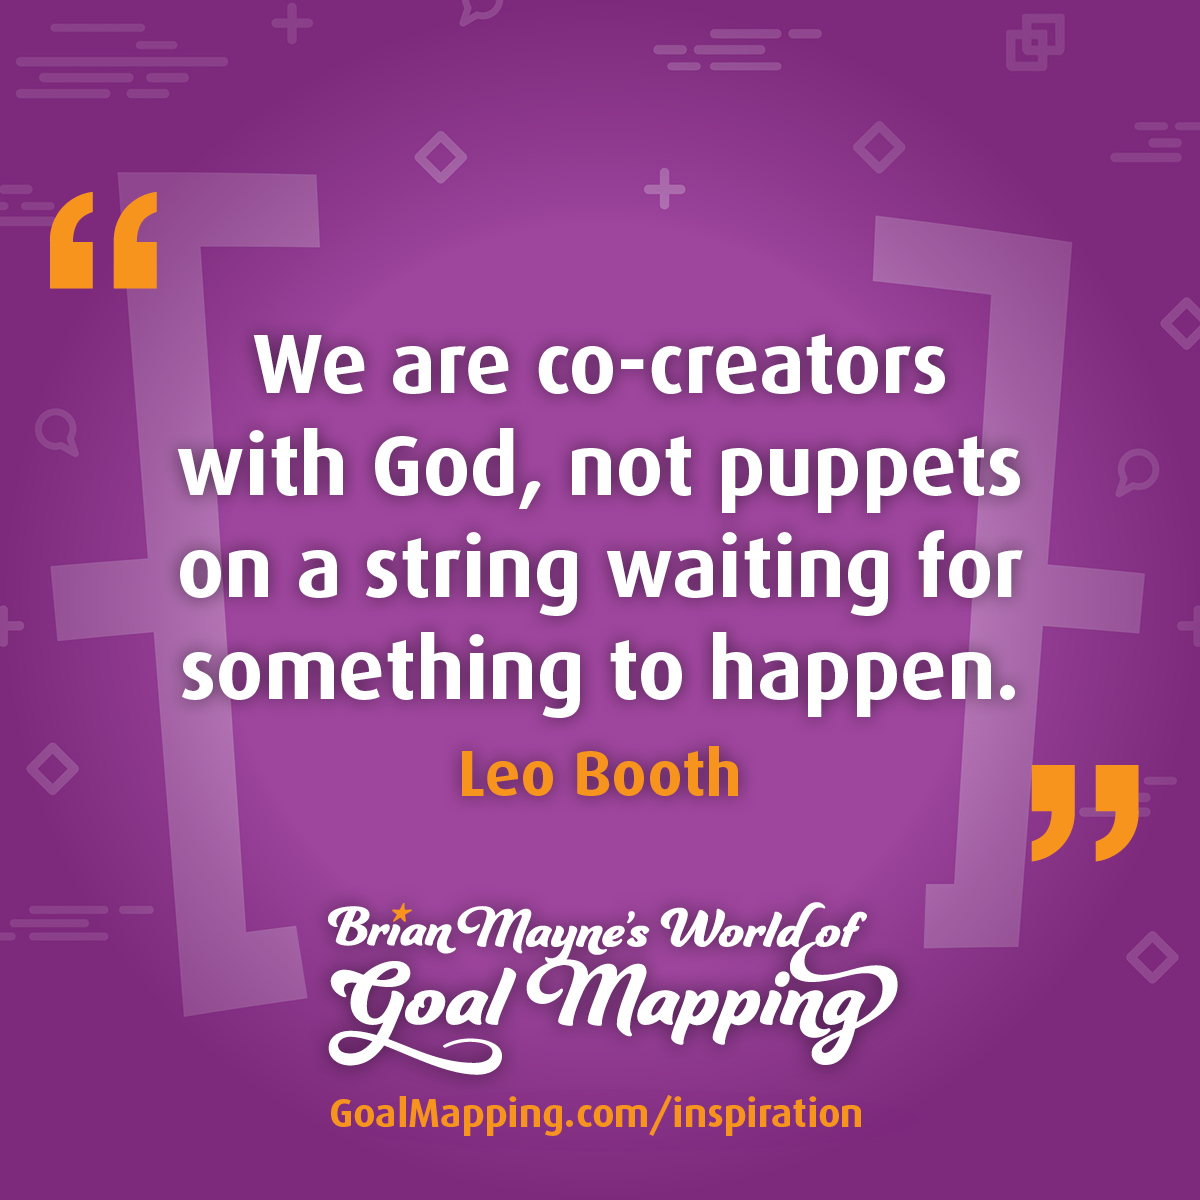 "We are co-creators with God, not puppets on a string waiting for something to happen." Leo Booth